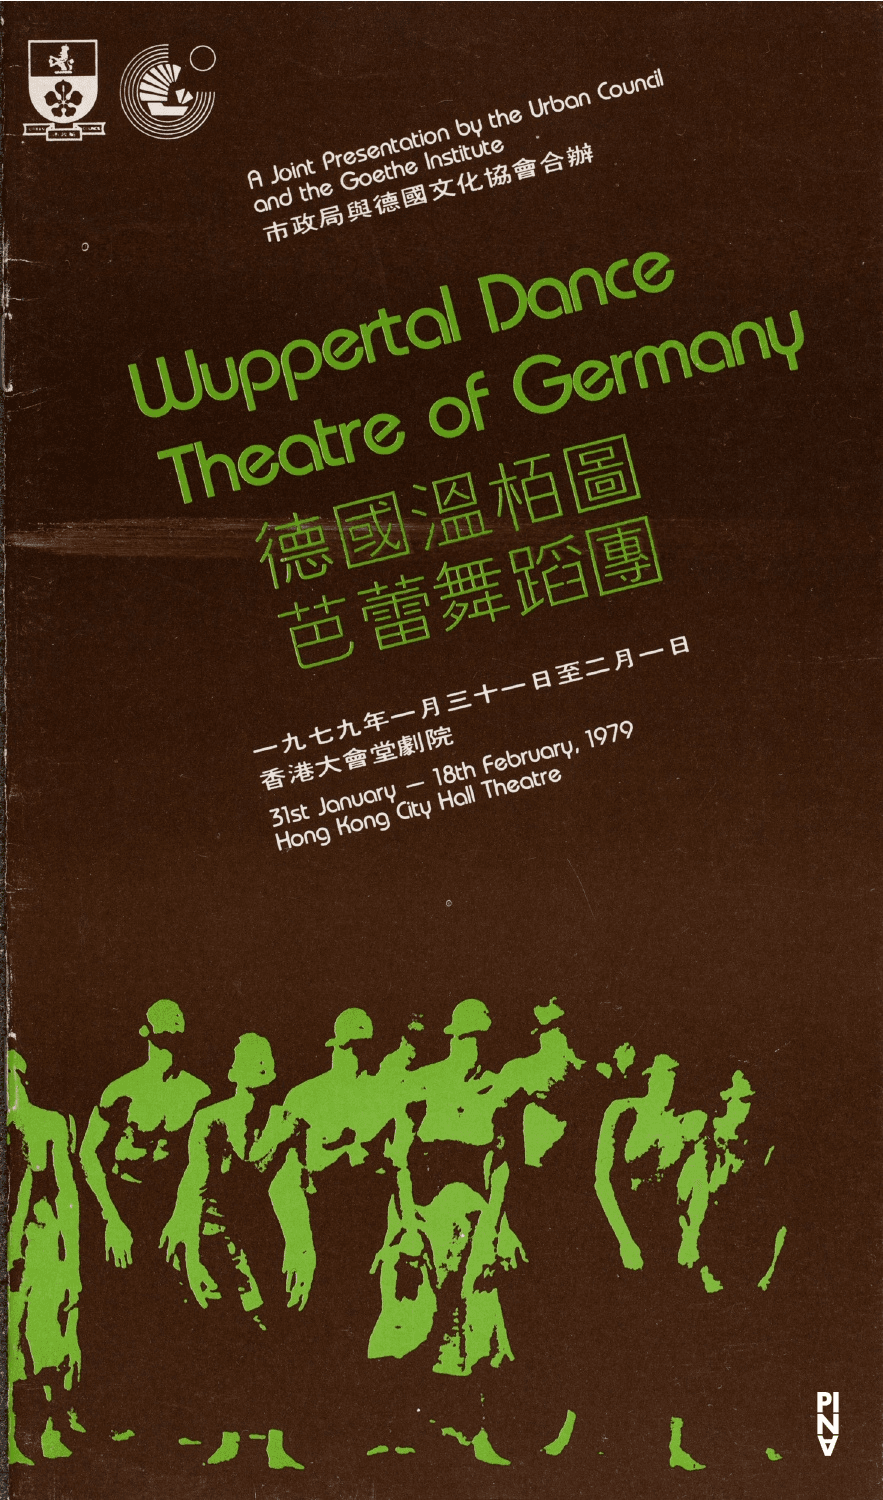 Booklet for “The Rite of Spring”, “Wind From West” and “The Second Spring” by Pina Bausch with Tanztheater Wuppertal in in Hong Kong, 01/31/1979 – 02/18/1979